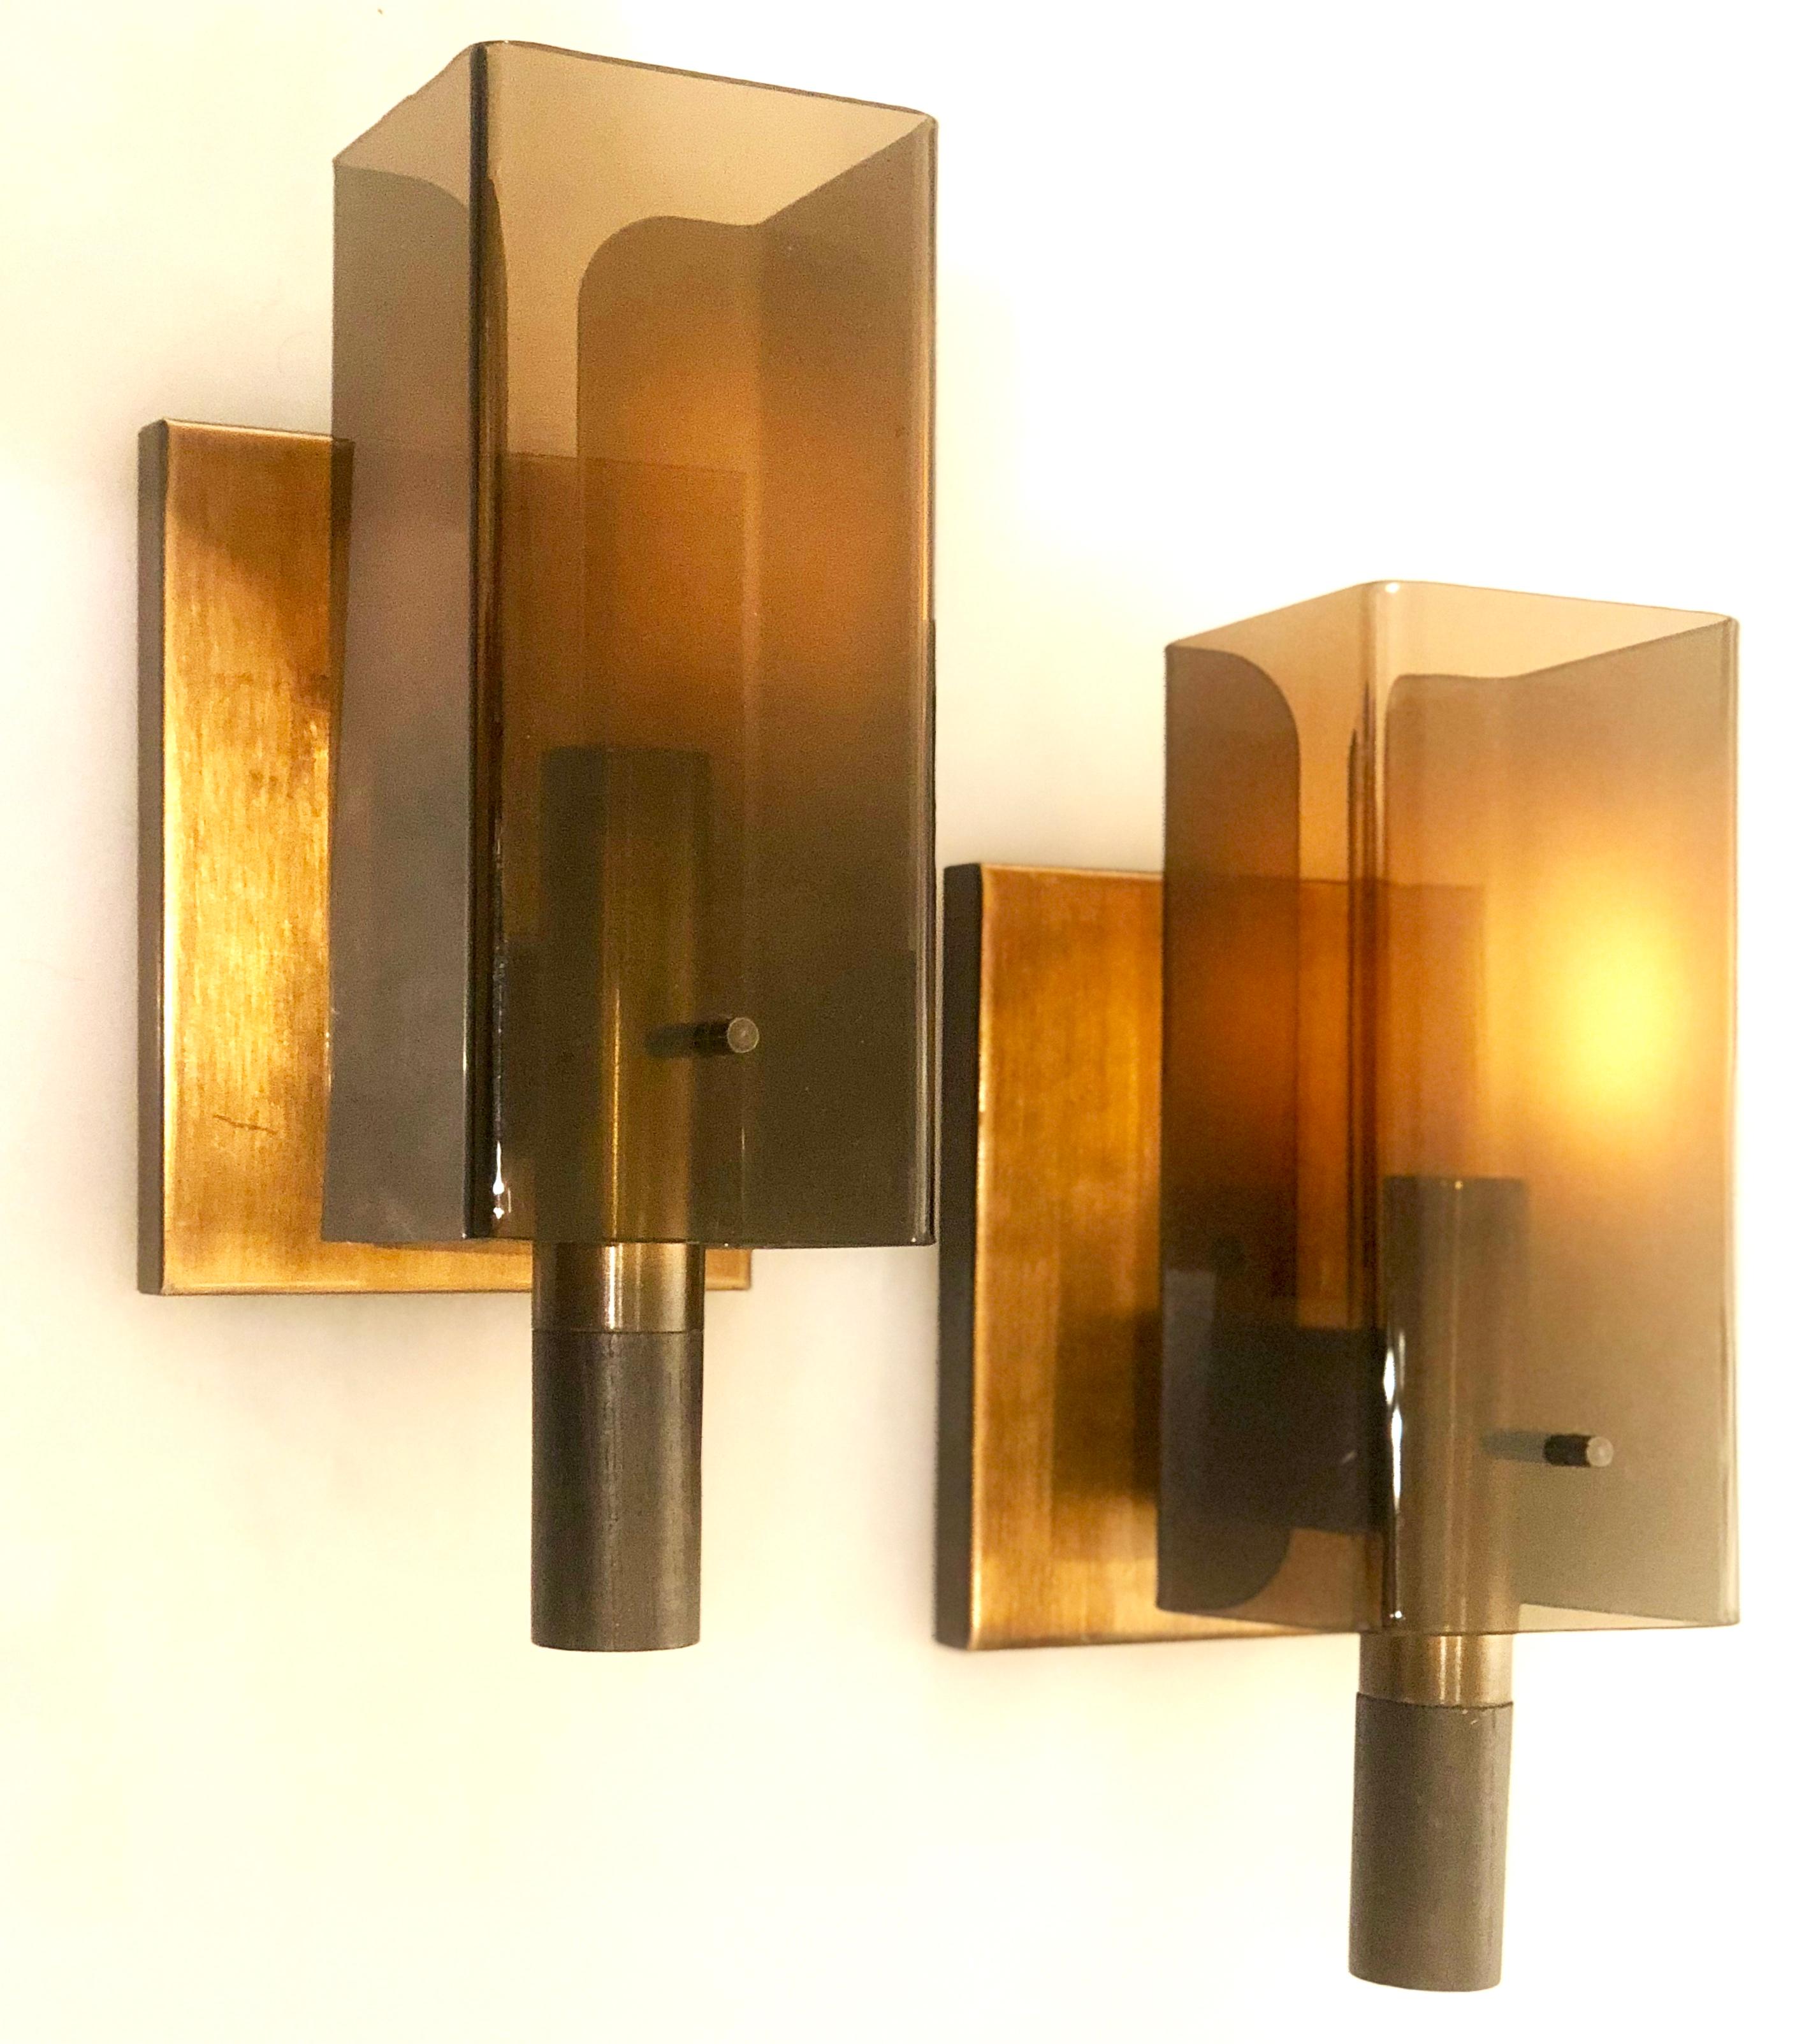 20th Century American Space Age Pair of Wall Sconces in Smoke Lucite and Copper